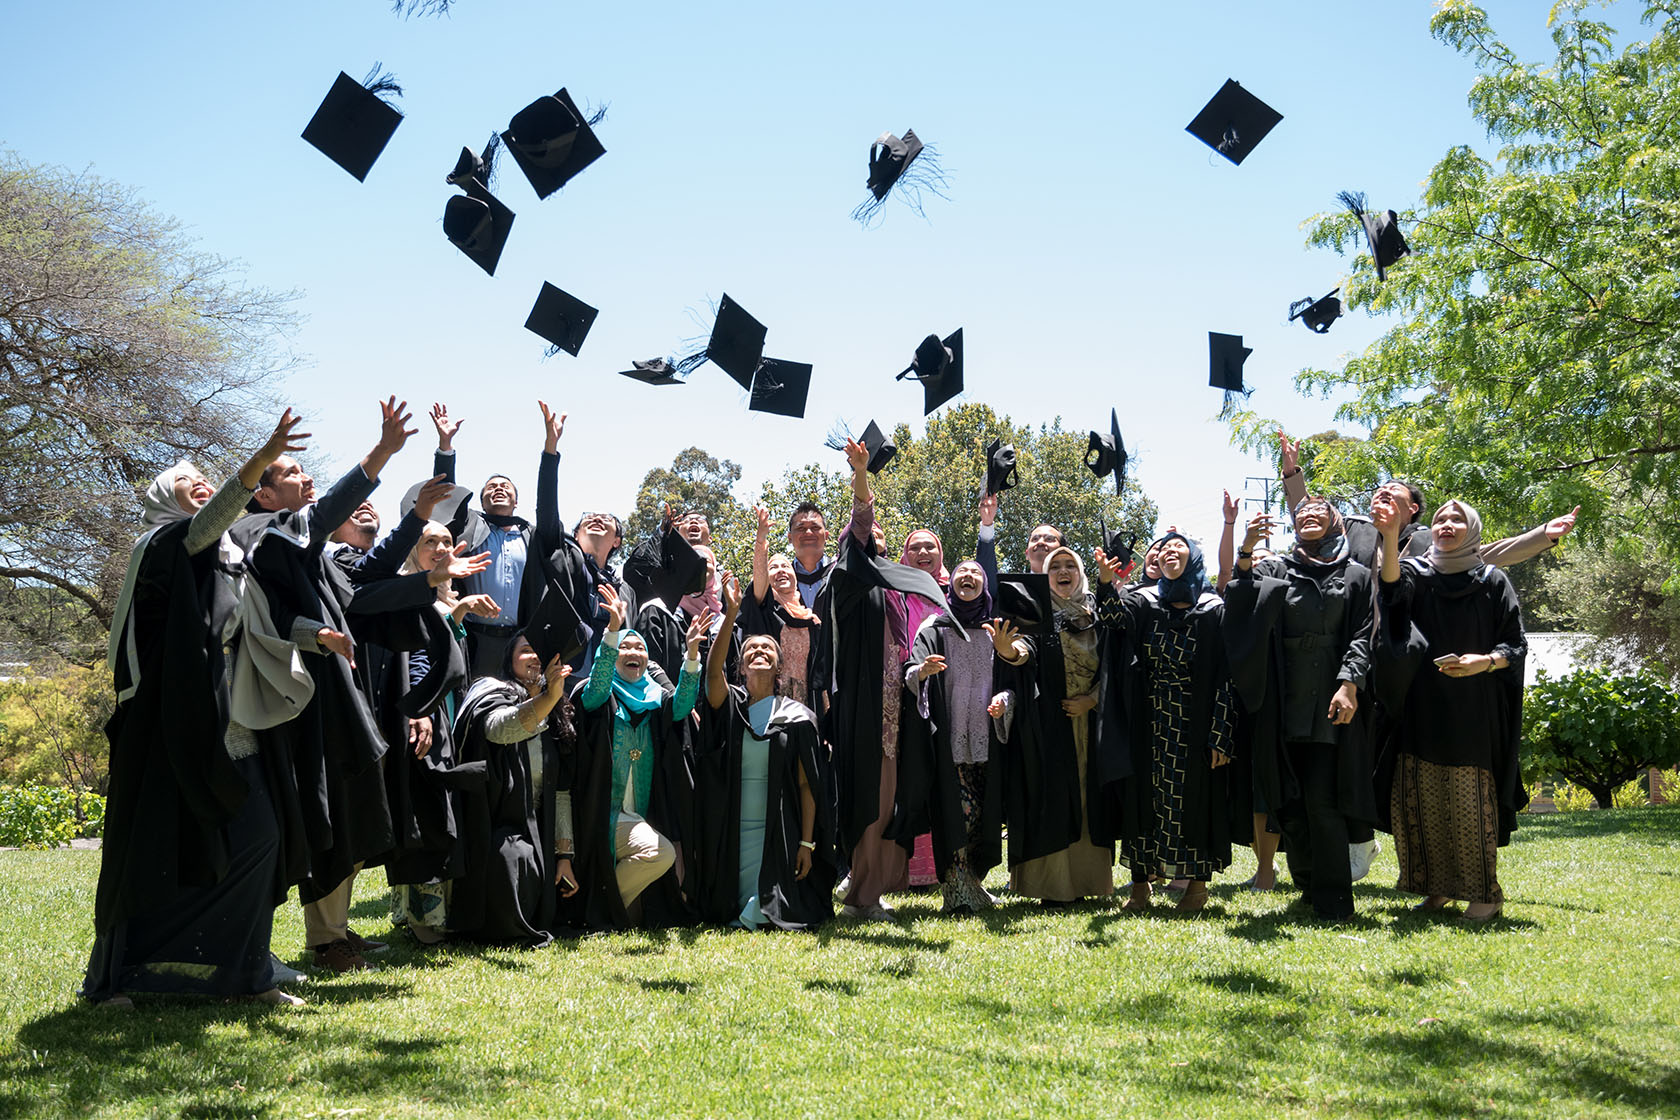 SSMP graduates smiling and throwing up their mortarboards in an outdoor scene